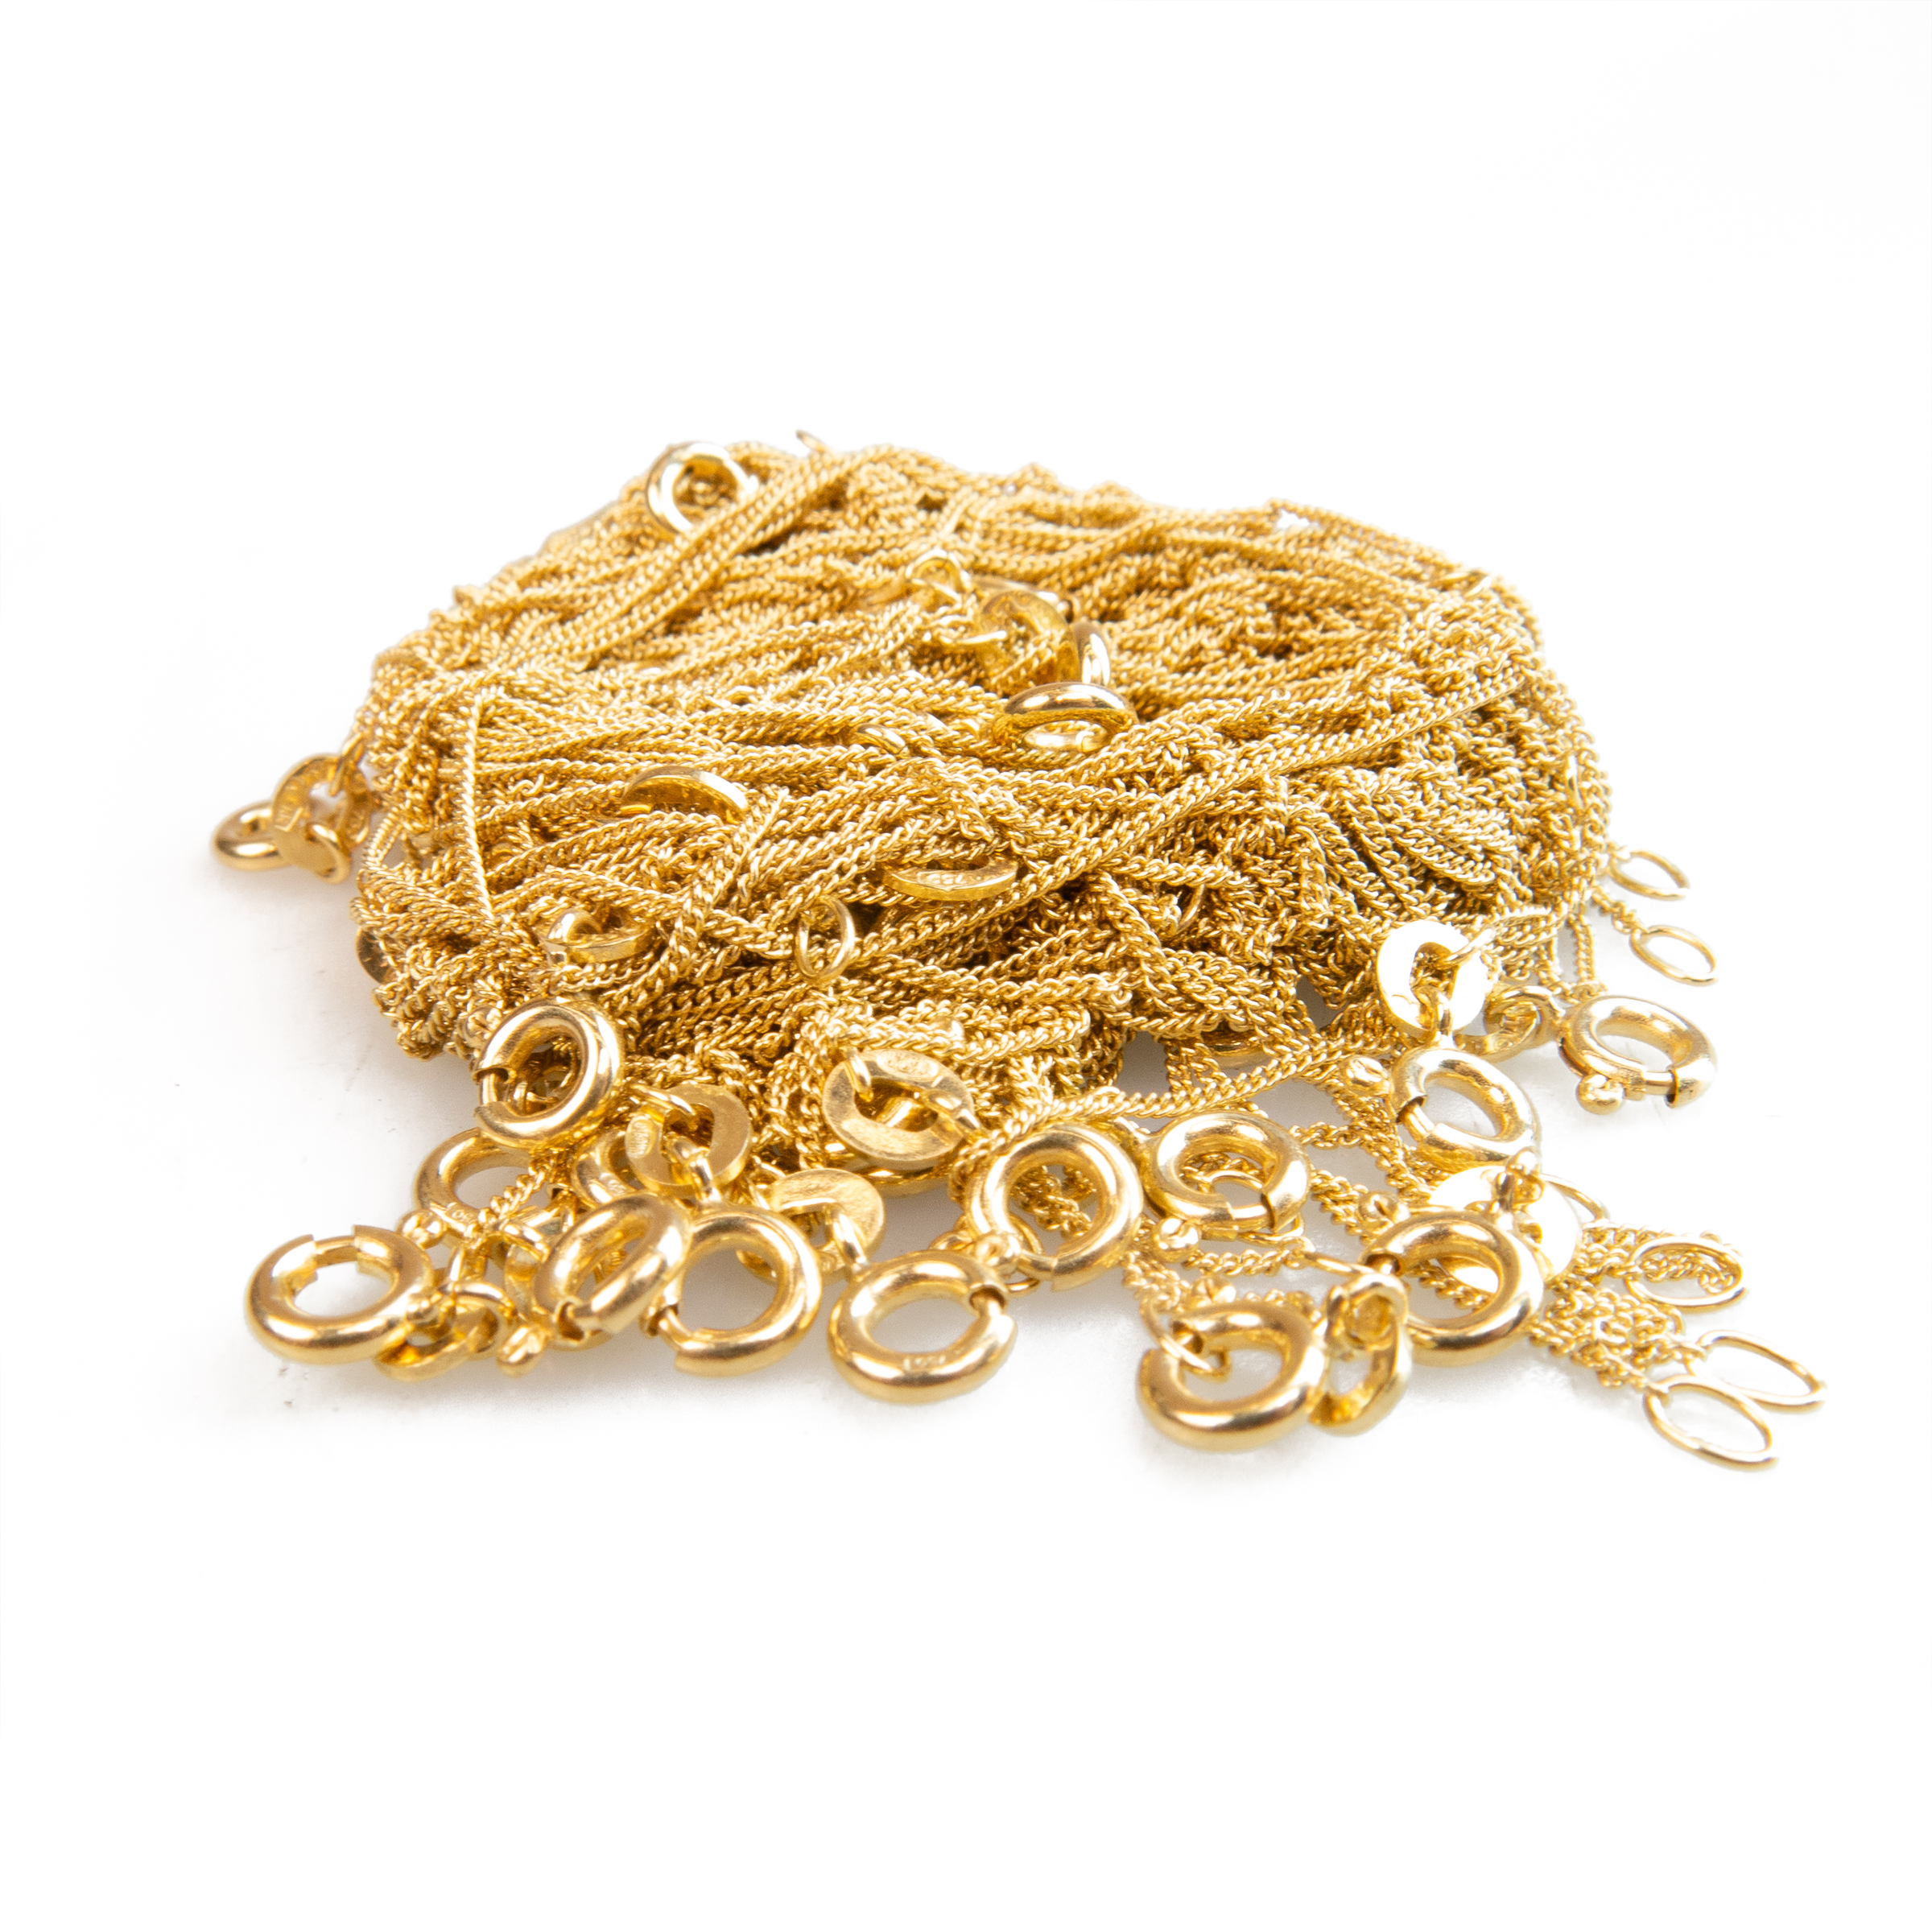 Approximately 46 x 18k Yellow Gold Fine Chains